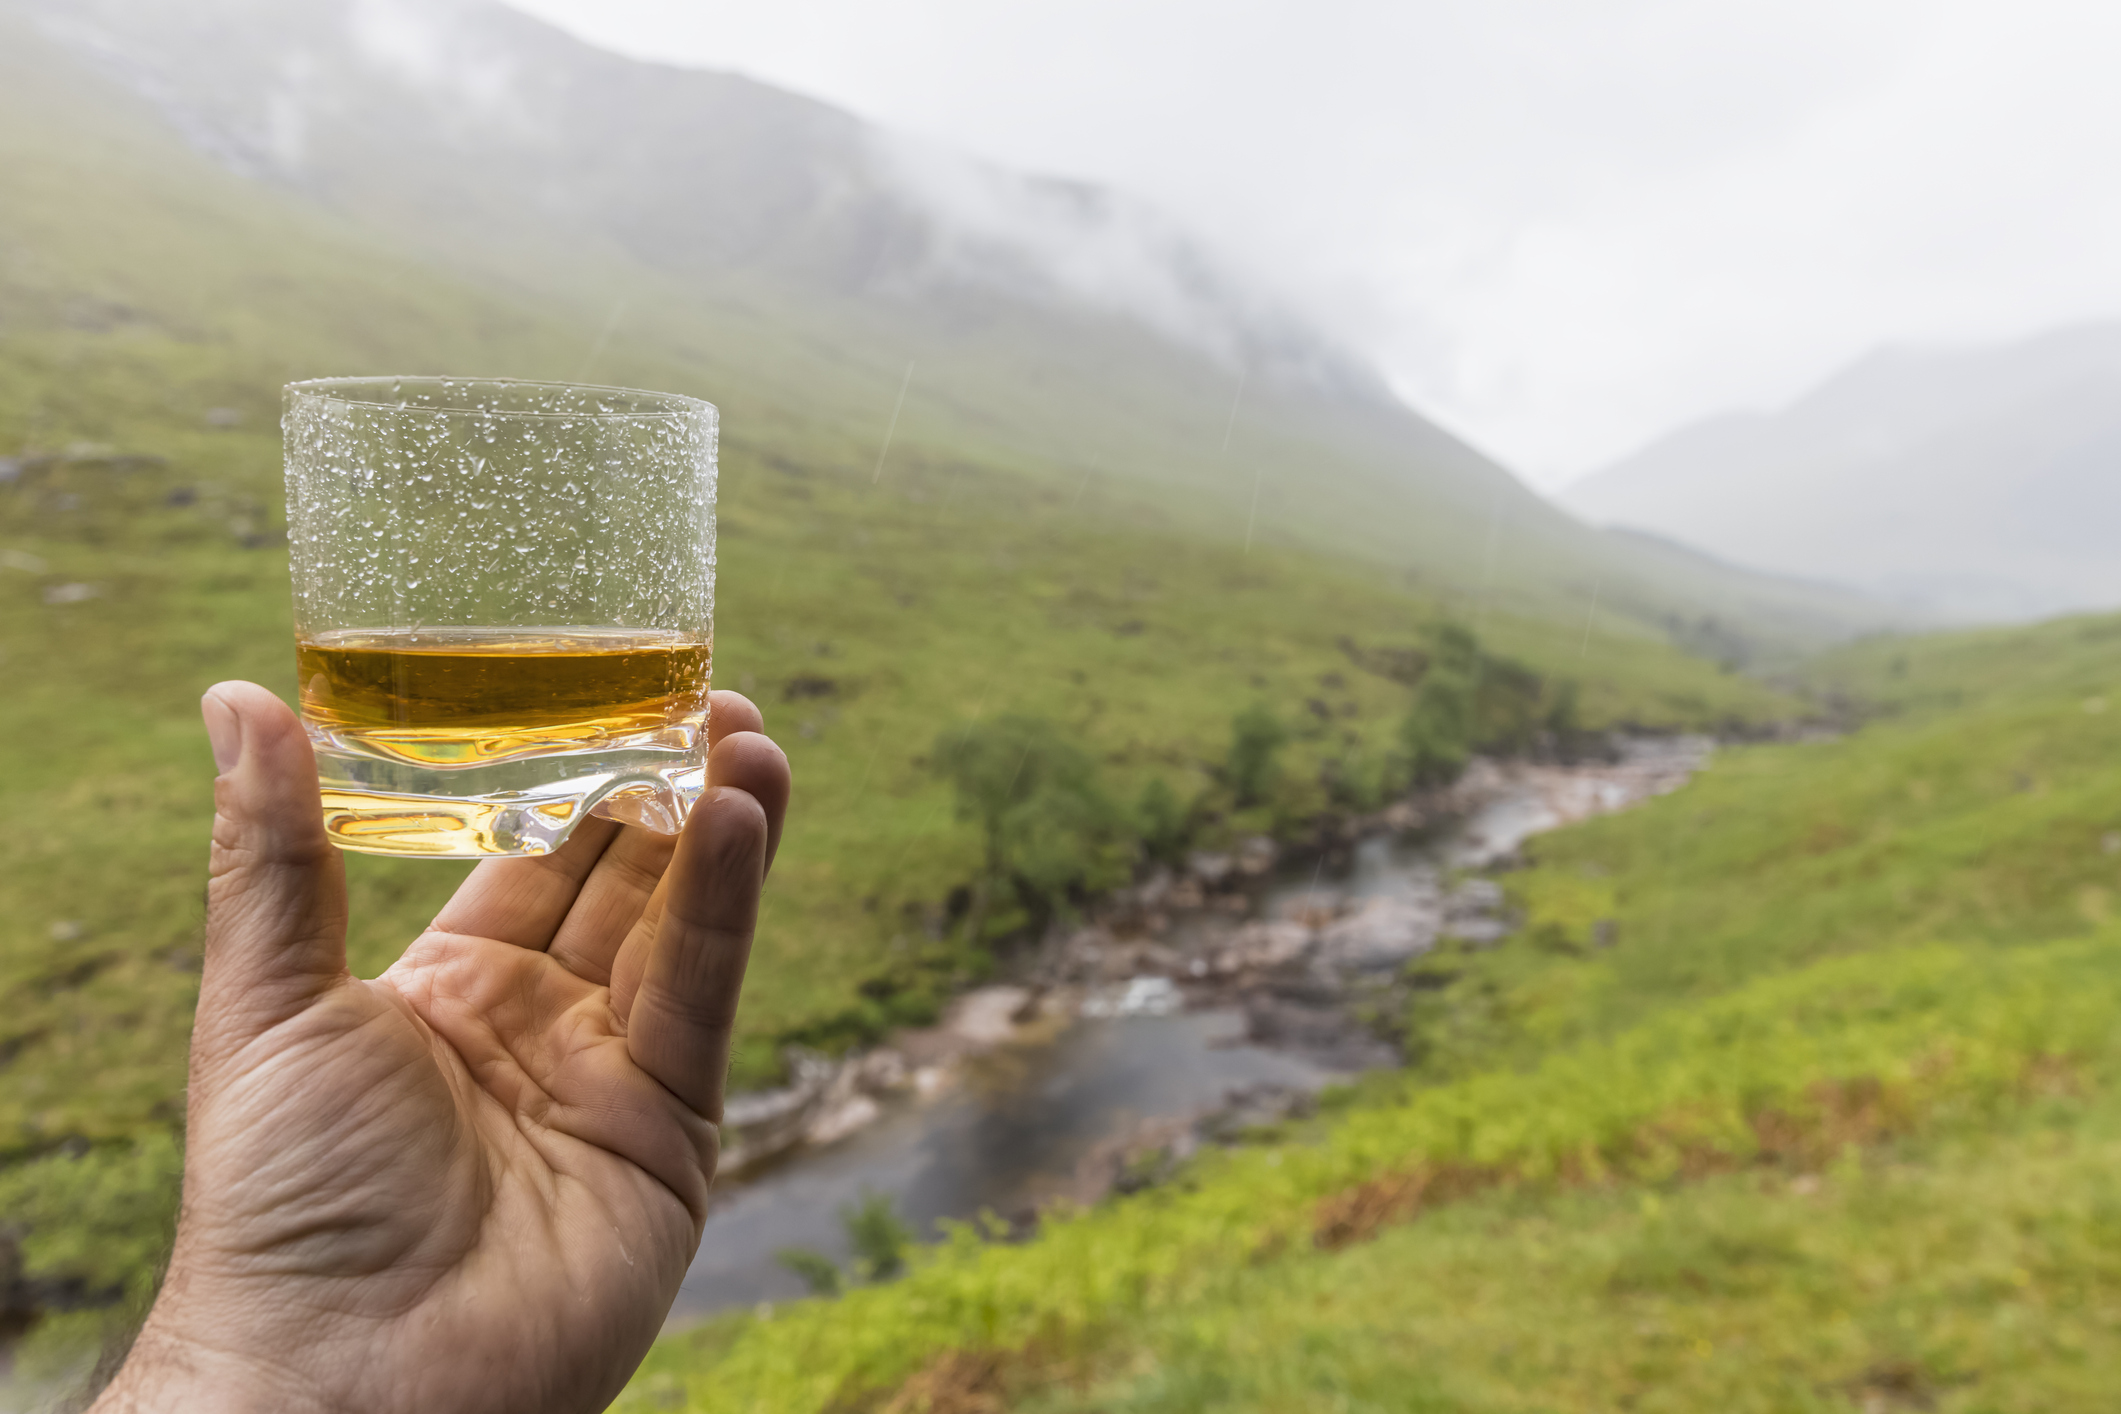 A person holding a glass of whisky in front of a mountain, showcasing the Art of Manliness.